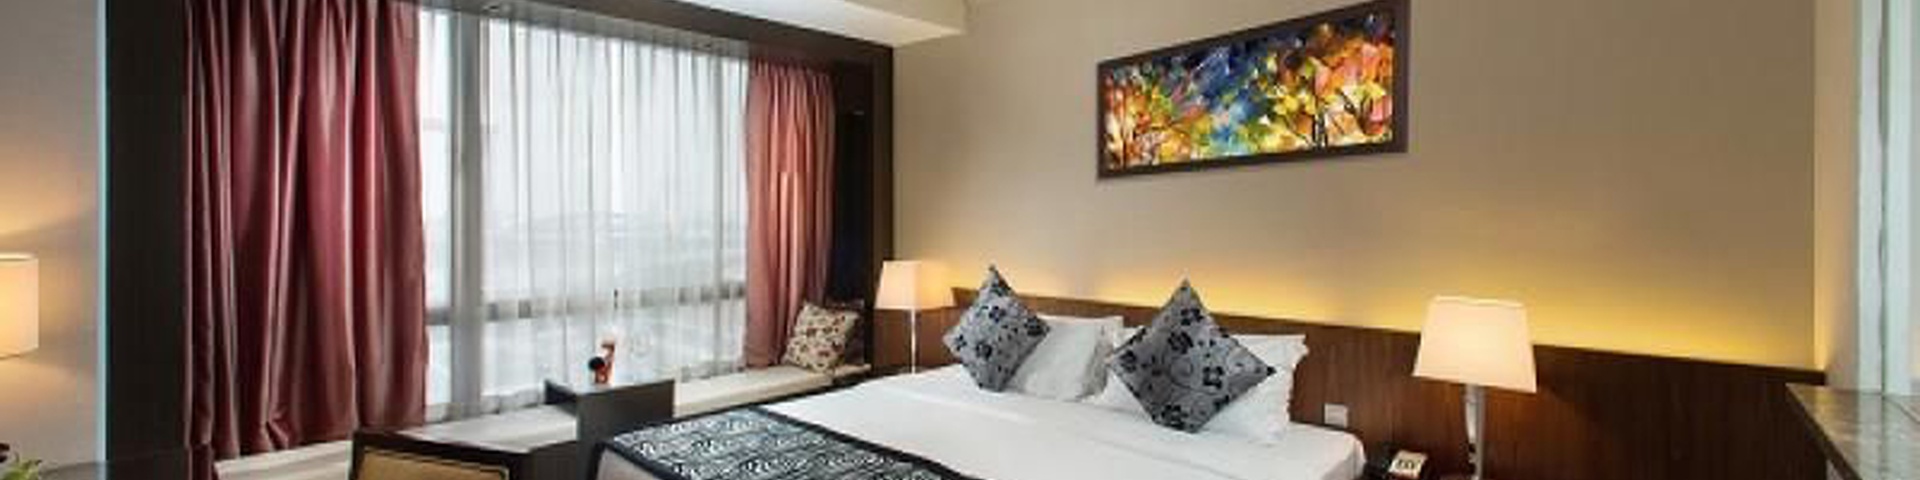 Best Rate - Non Refundable Peninsula Excelsior Hotel Singapore 